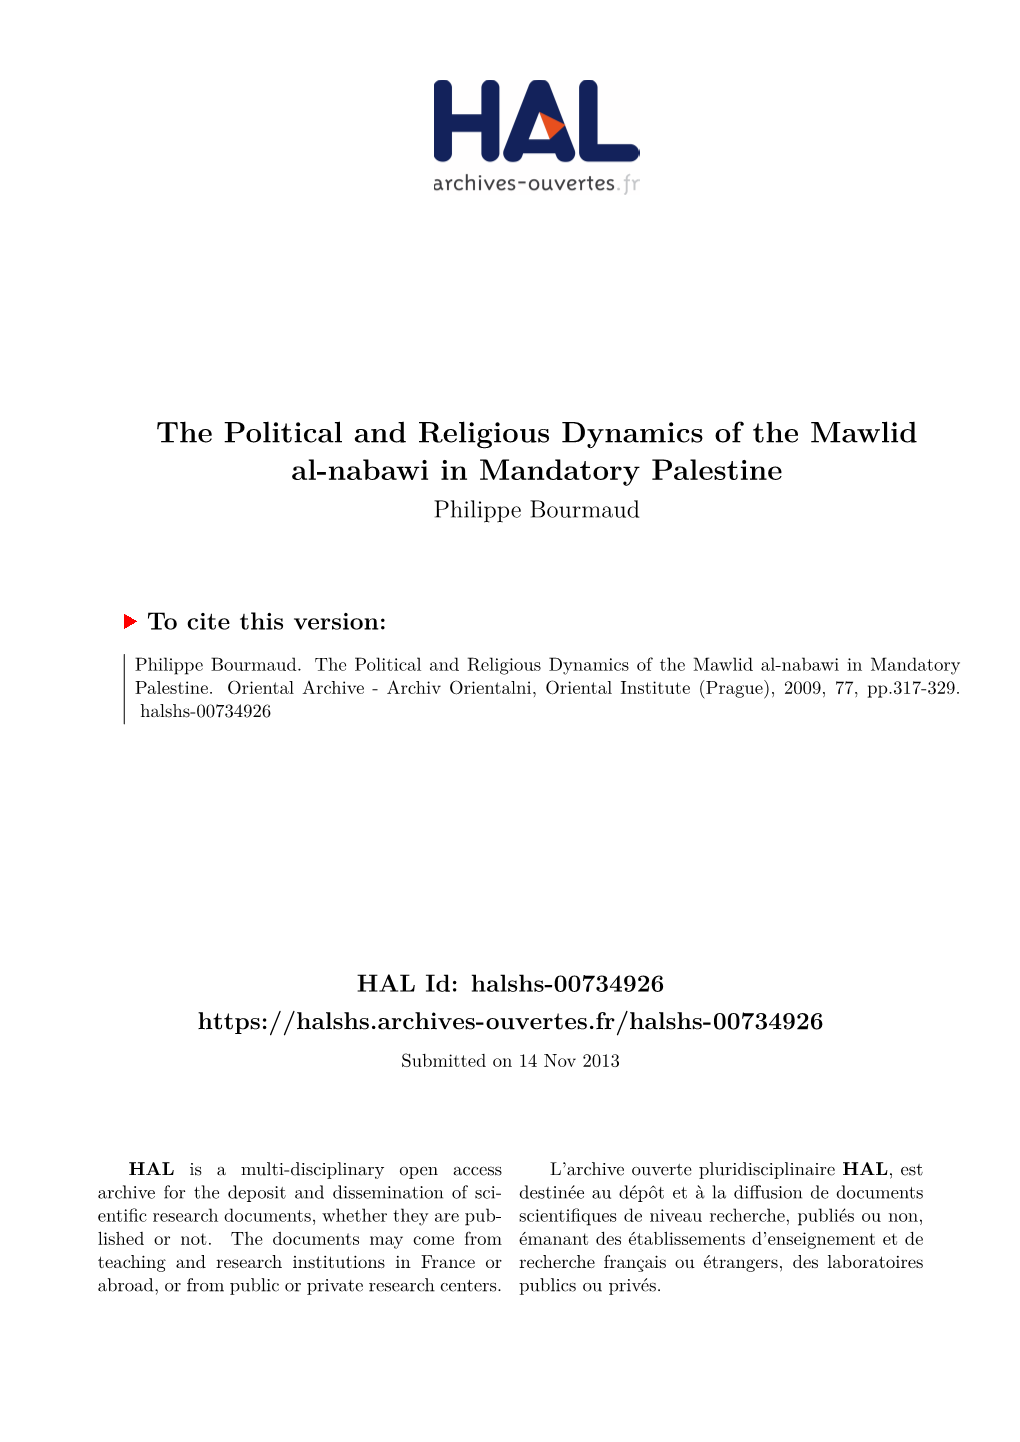 The Political and Religious Dynamics of the Mawlid Al-Nabawi in Mandatory Palestine Philippe Bourmaud